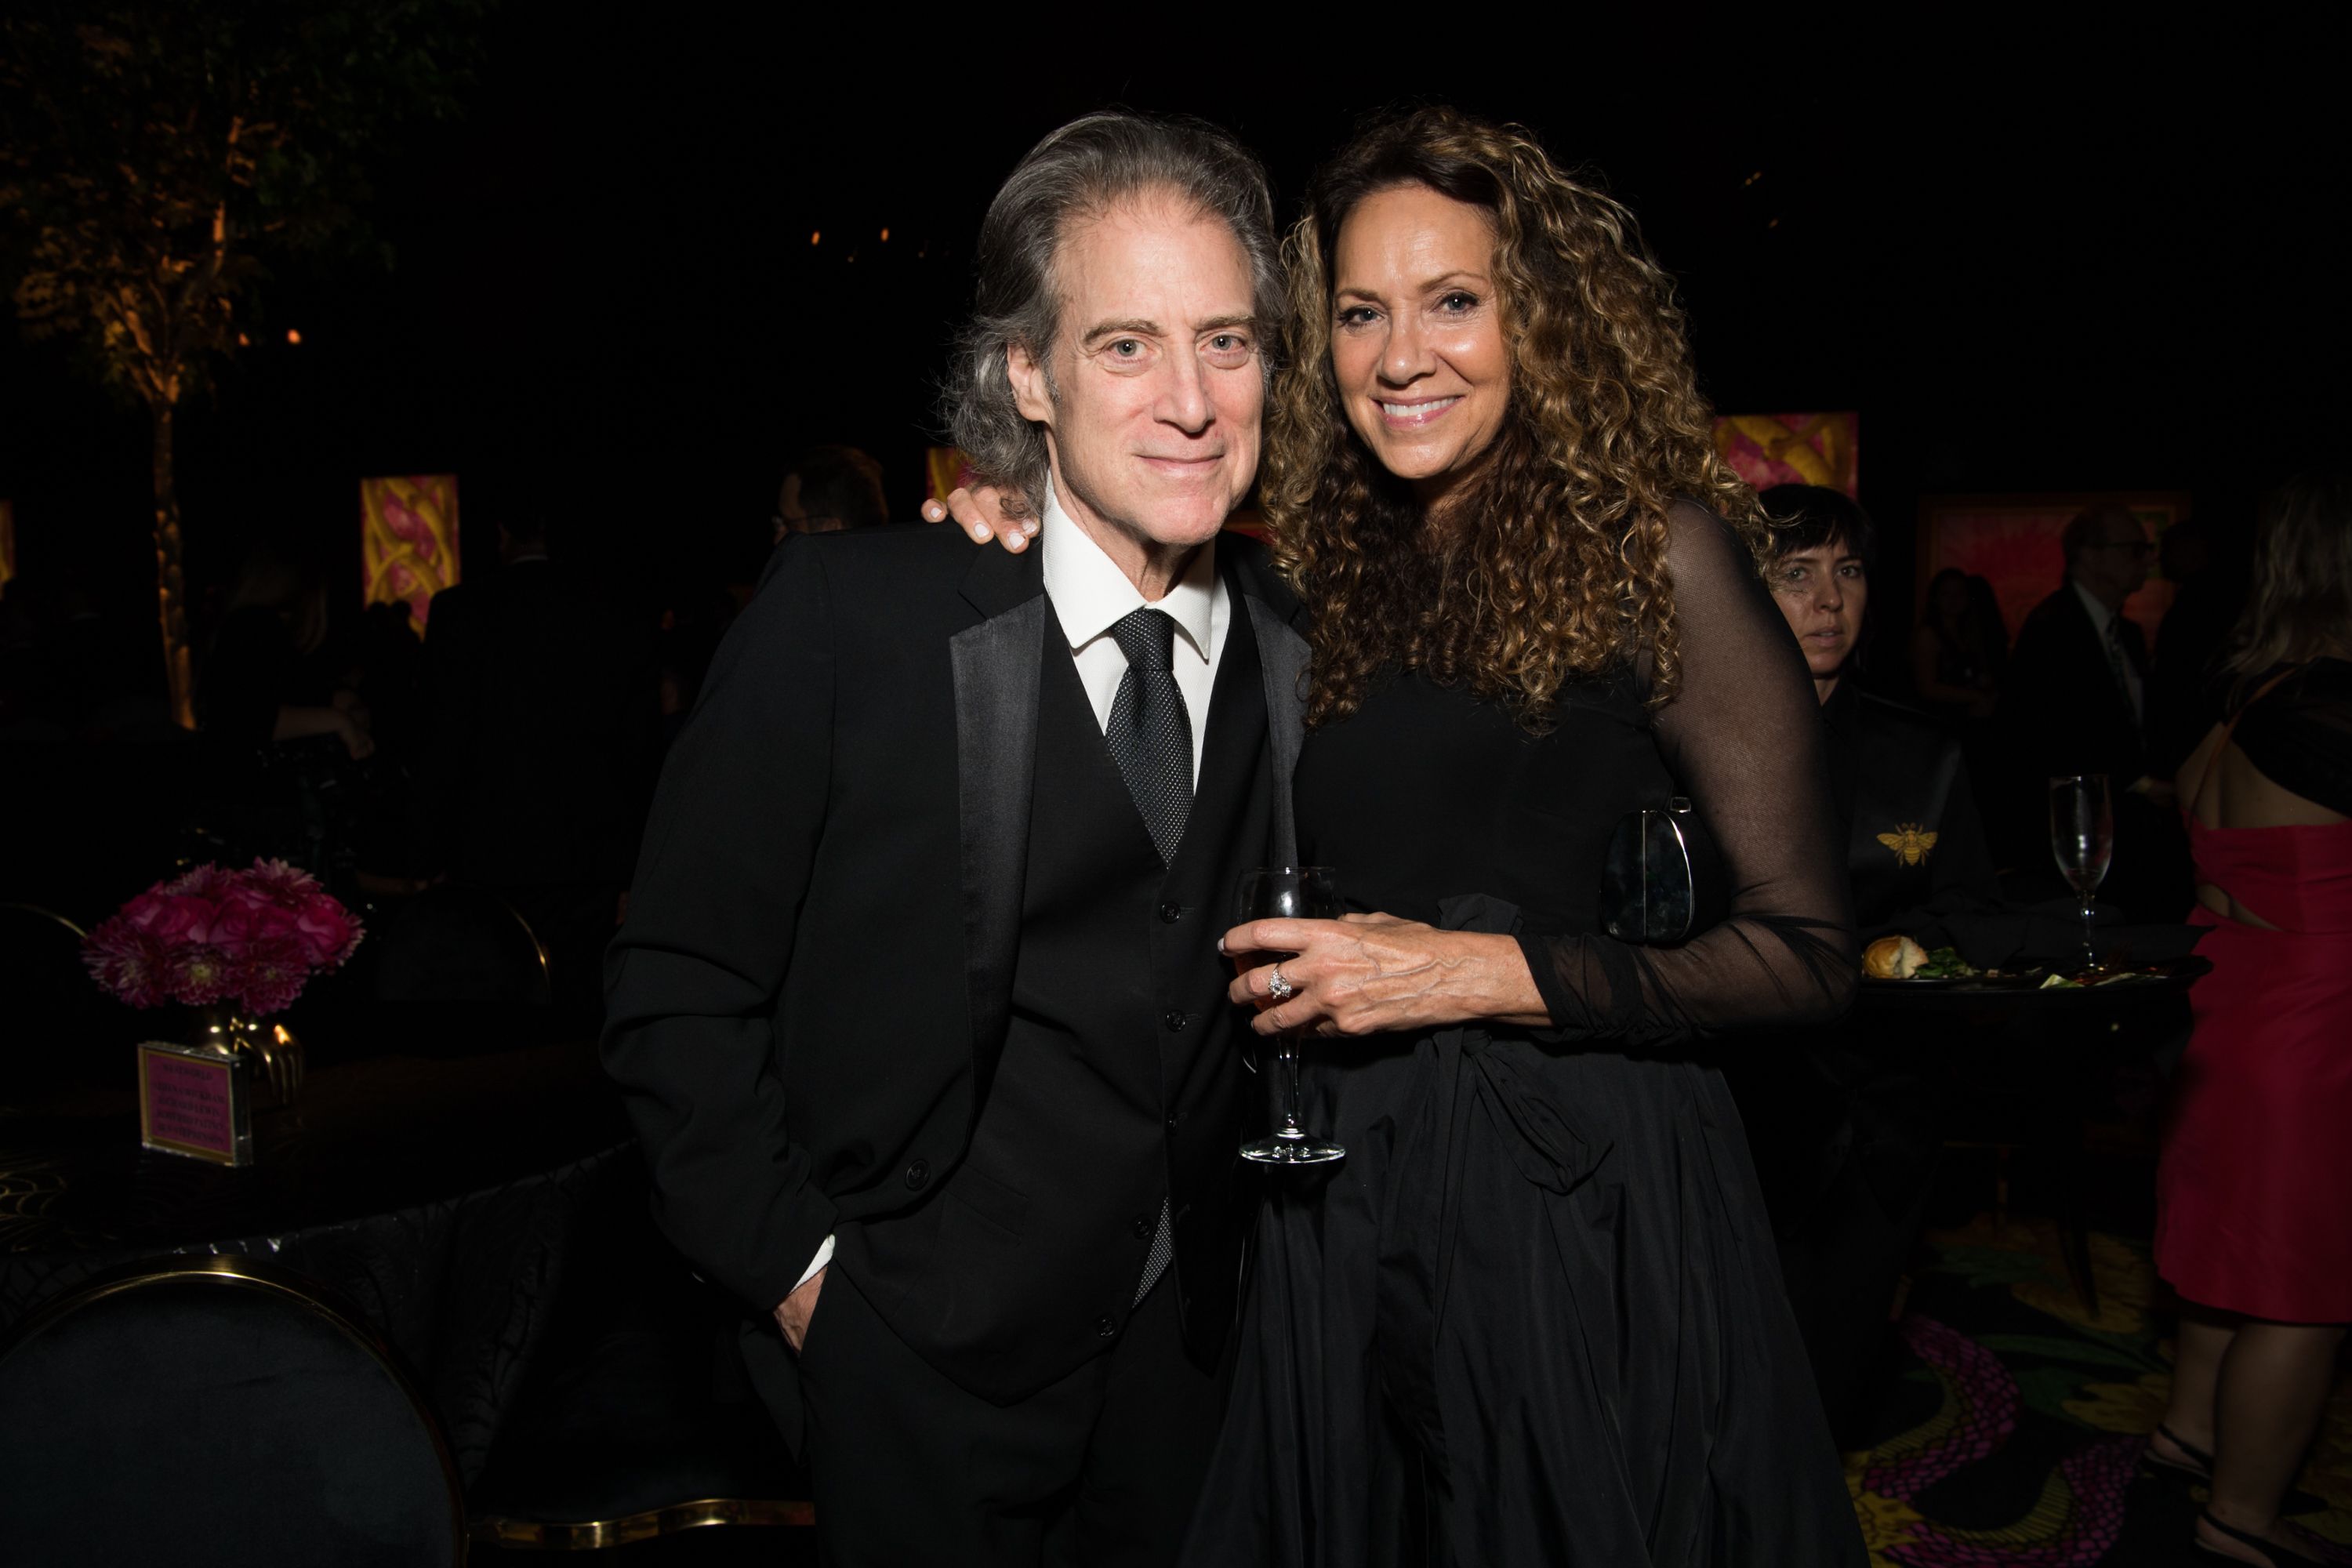 Richard Lewis and Joyce Lapinsky during HBO's Post Emmy Awards Reception at the Plaza at the Pacific Design Center on September 17, 2018, in Los Angeles, California. | Source: Getty Images